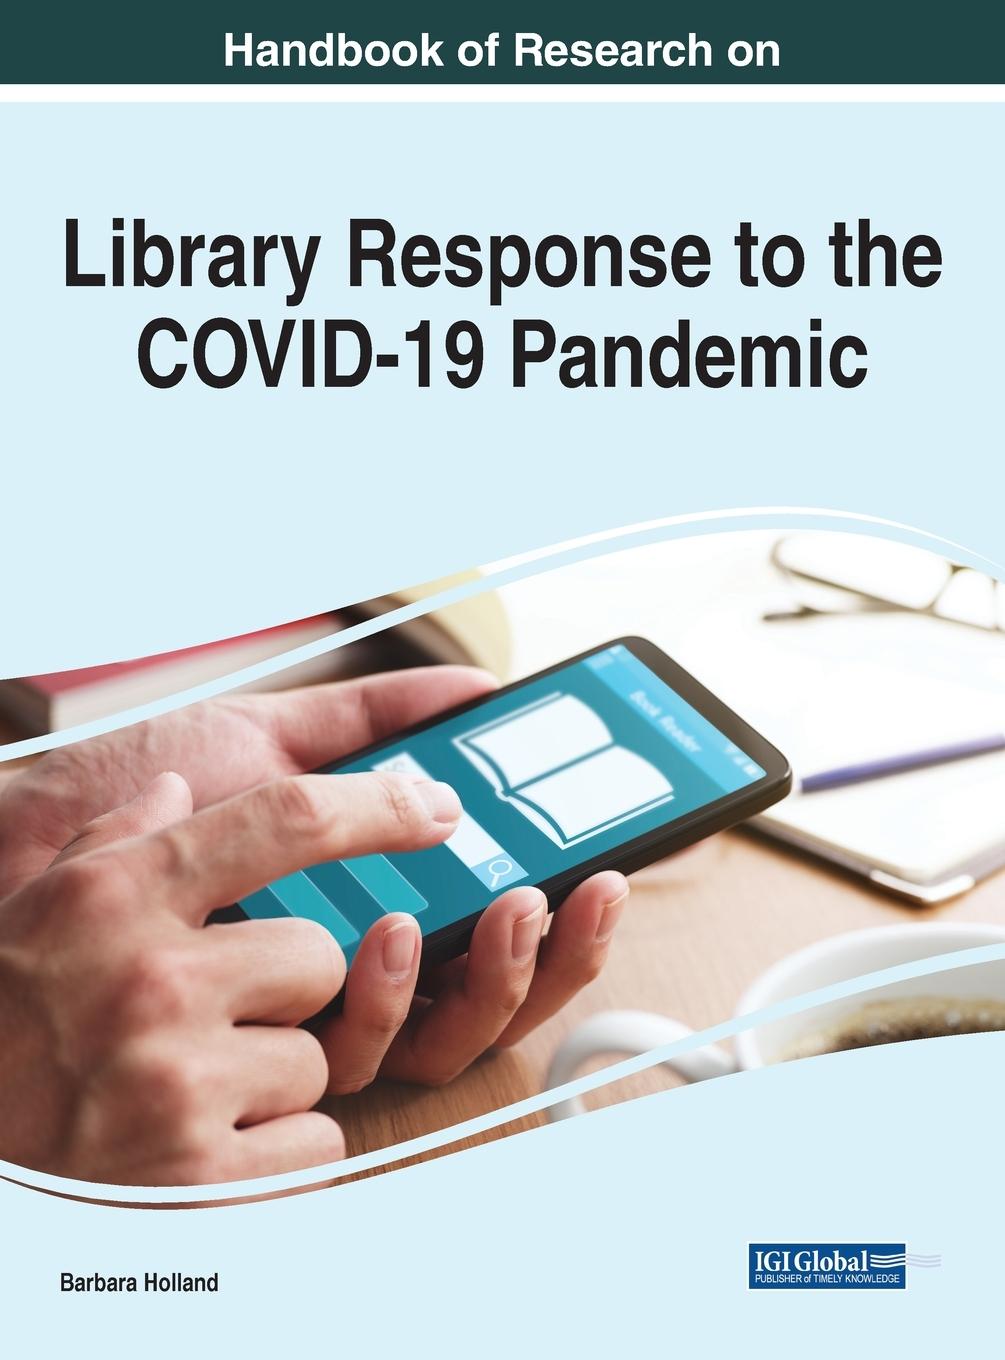 Book Handbook of Research on Library Response to the COVID-19 Pandemic 